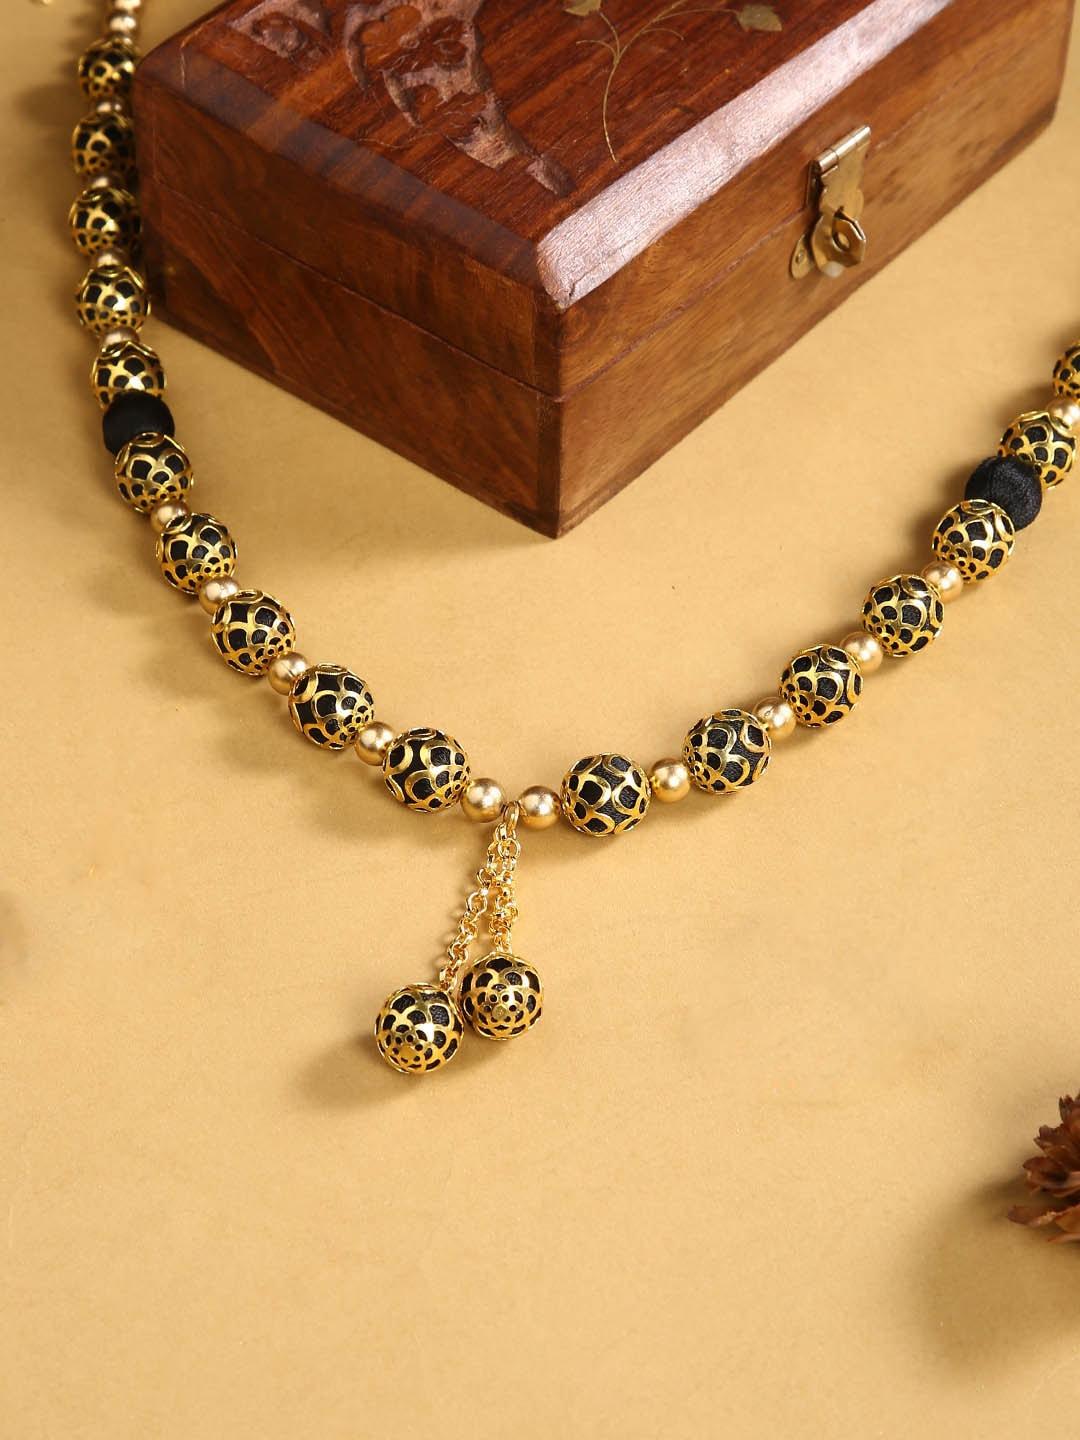 akshara black & gold-toned german silver gold-plated handcrafted necklace